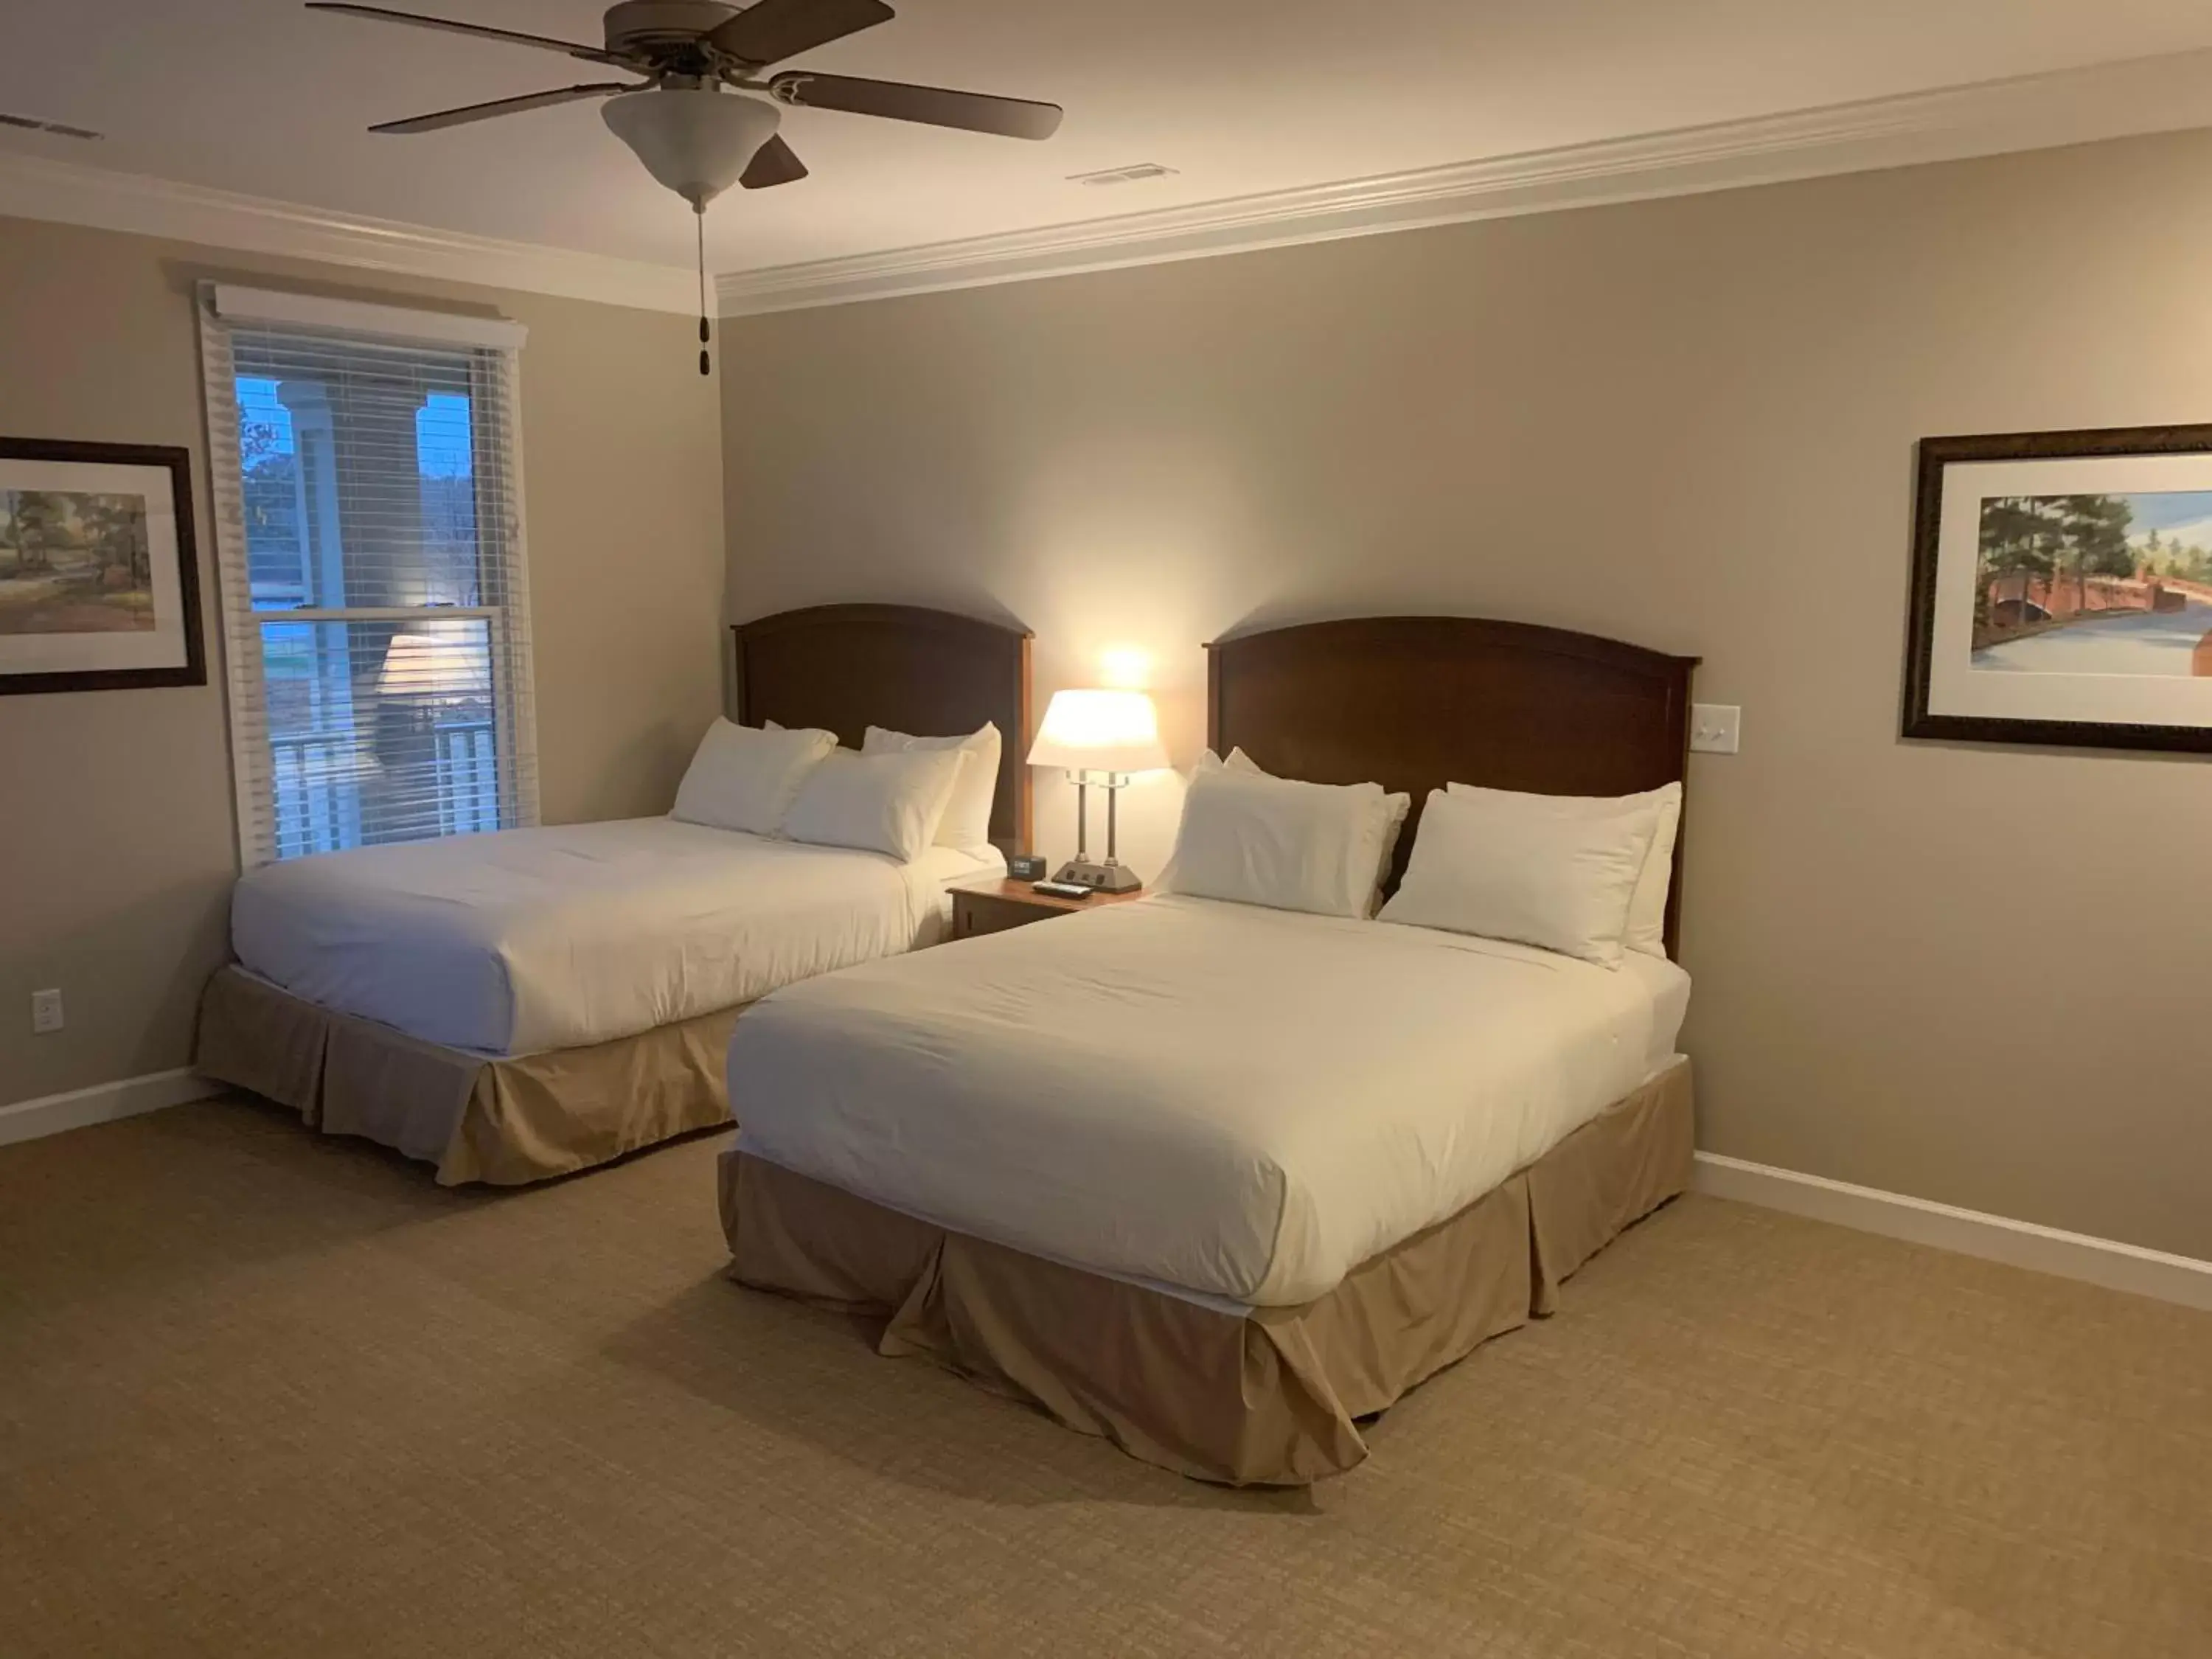 Bed in Cottages and Suites at River Landing